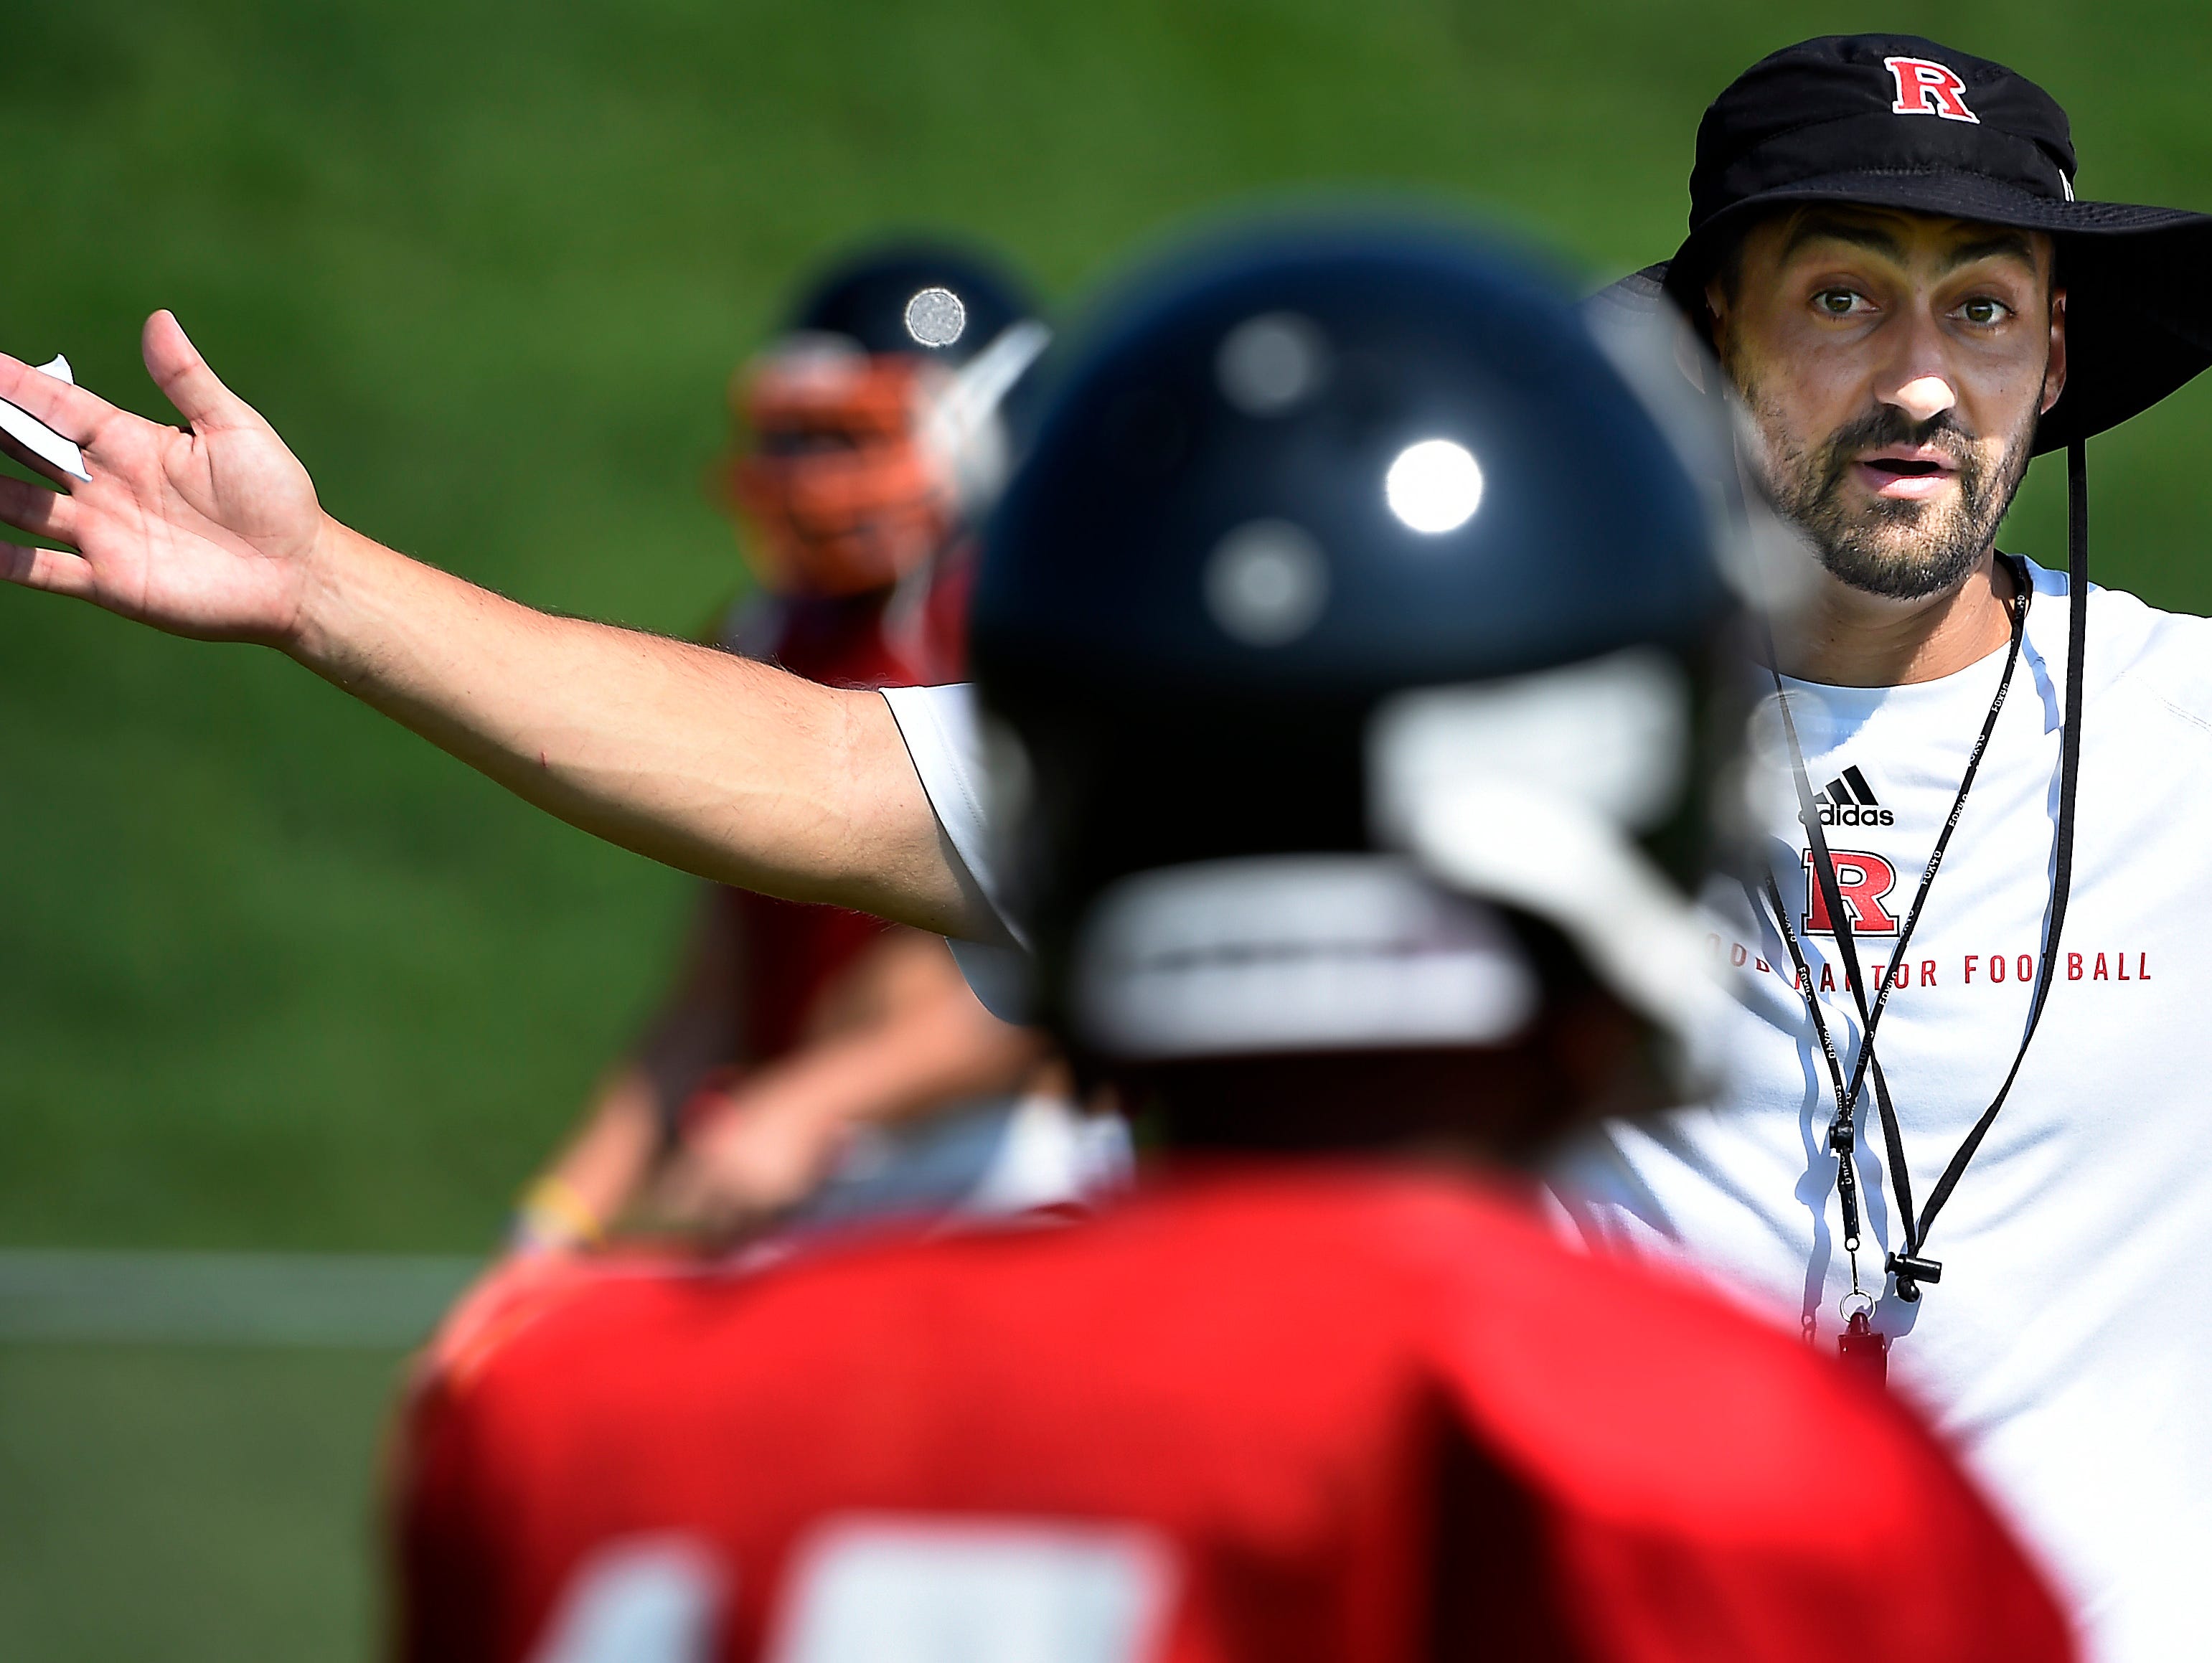 Ravenwood coach Richie Wessman talks with a player during practice Monday, the first day of practice in full pads for Tennessee high school football teams.